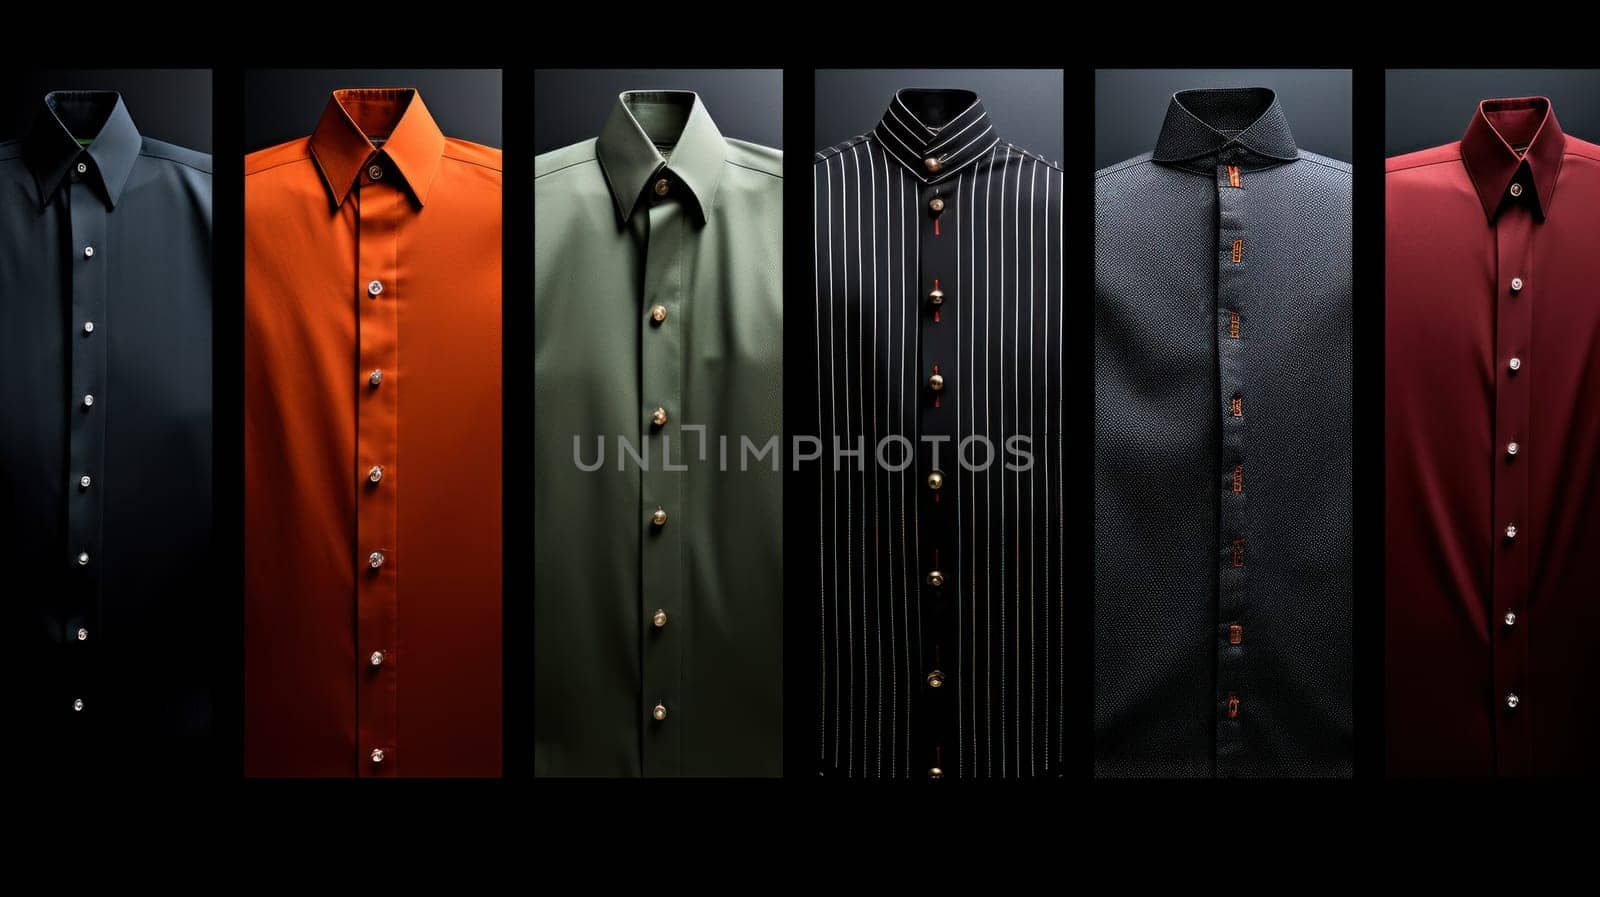 A row of men's dress shirts with different colors and patterns